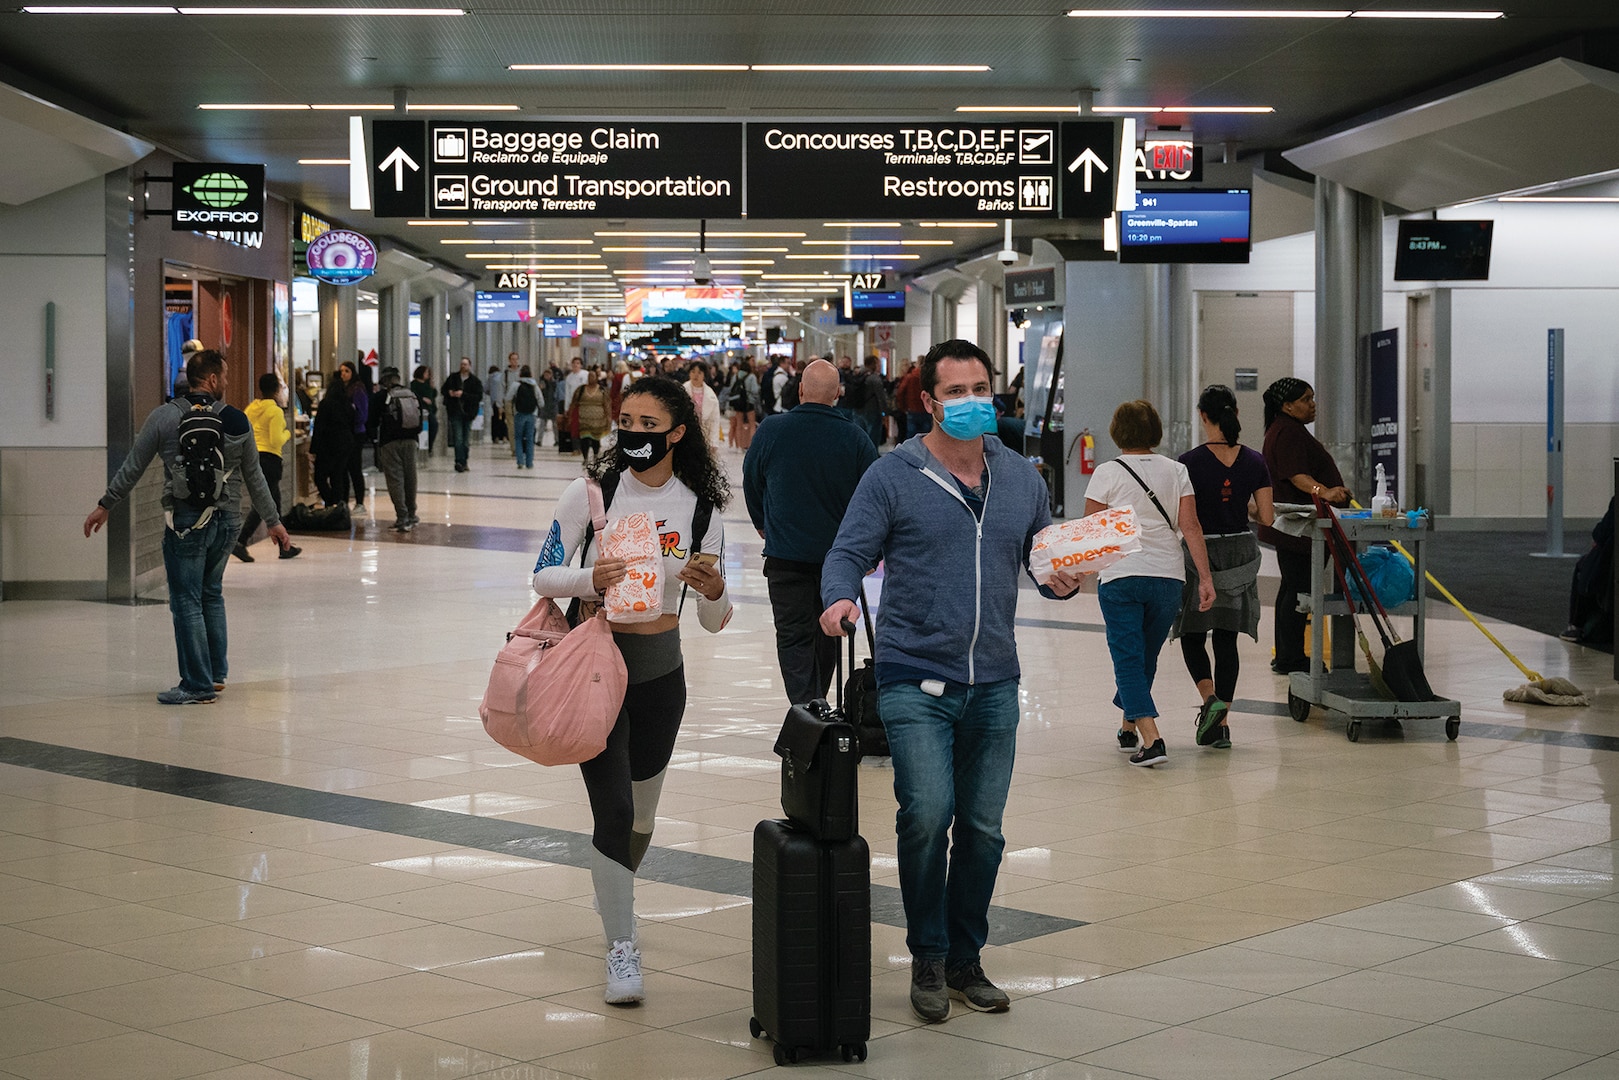 Flyers at Hartsfield-Jackson Atlanta International Airport wearing facemasks on March 6th, 2020 as the COVID-19 coronavirus spreads throughout the United States. (Chad Davis, March 6, 2020)